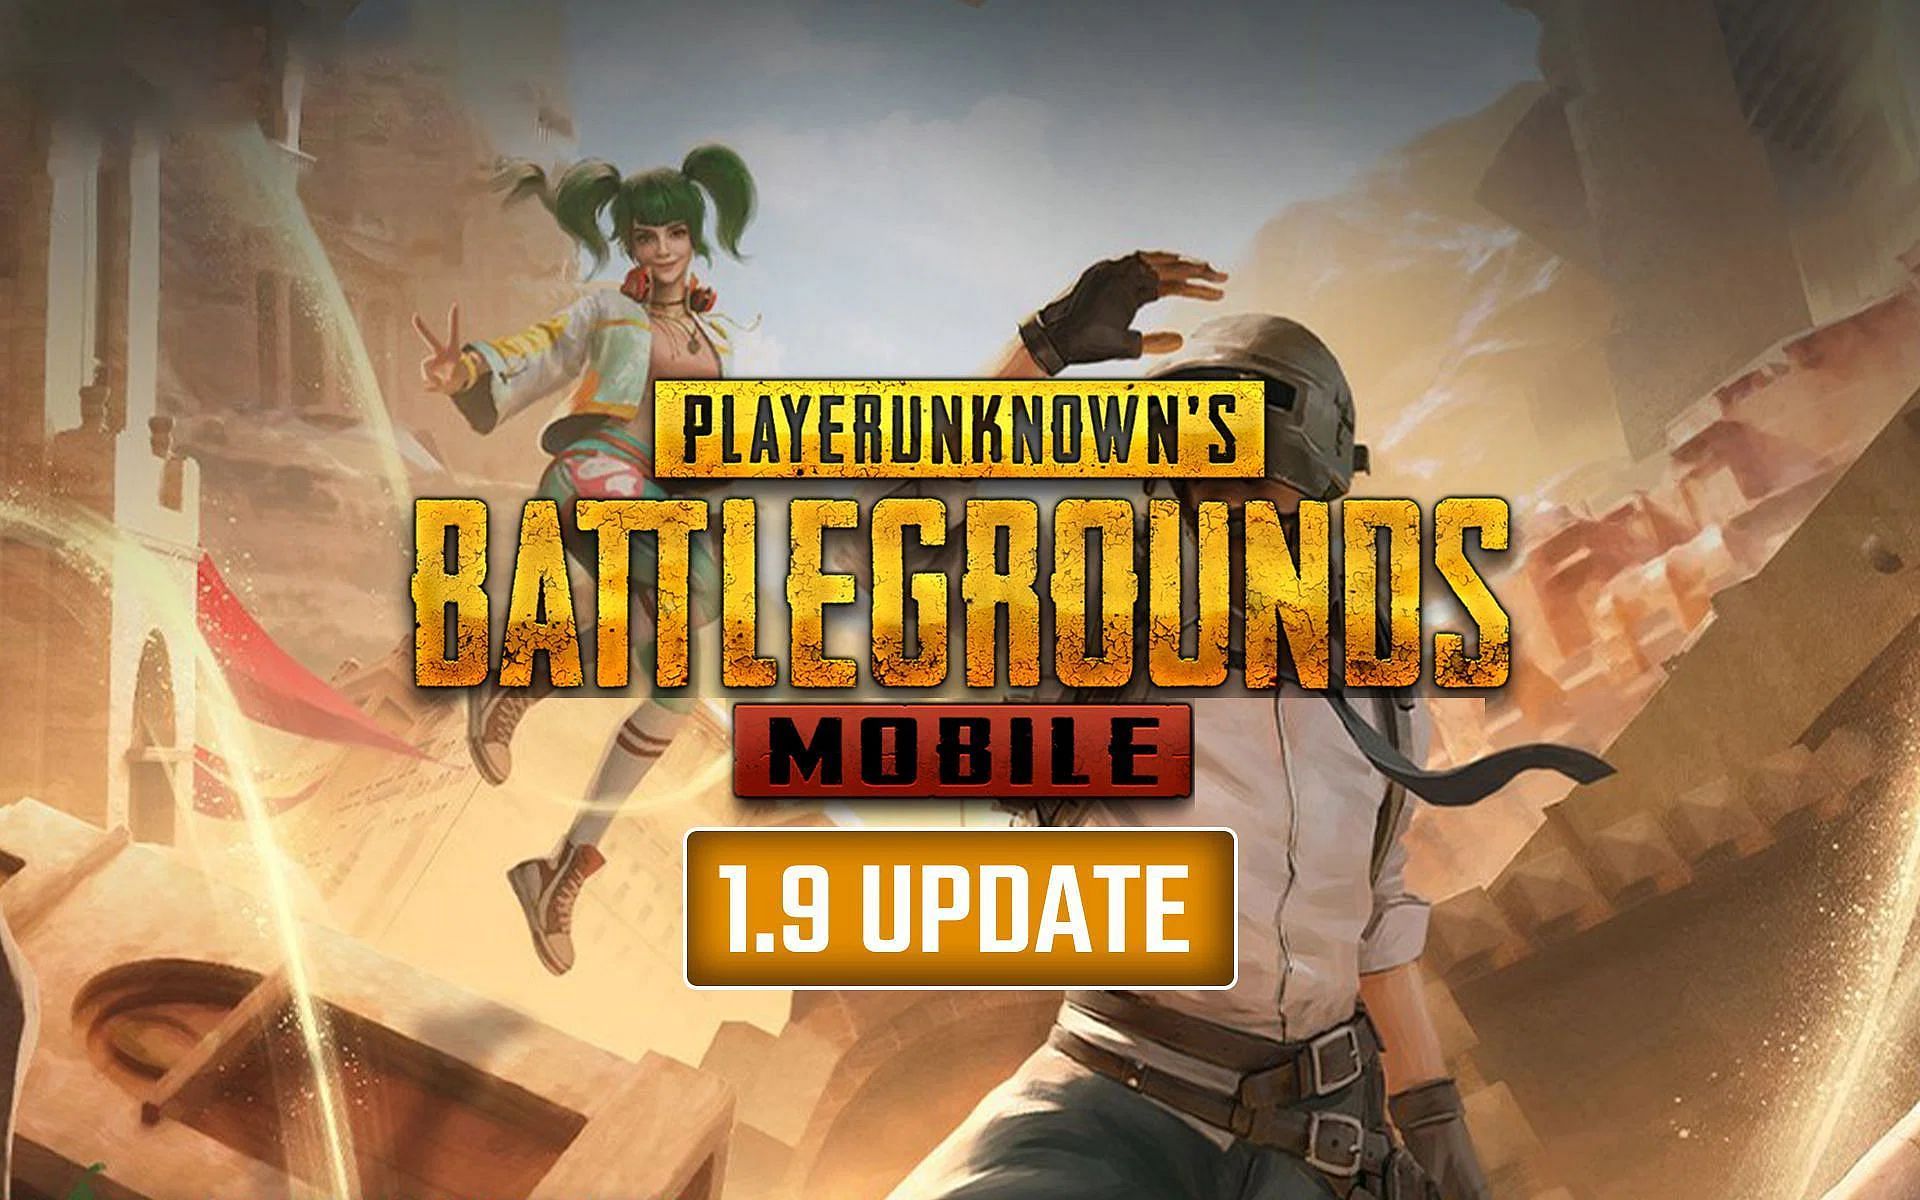 How to download and install the PUBG Mobile 1.9 APK file (Image via Sportskeeda)